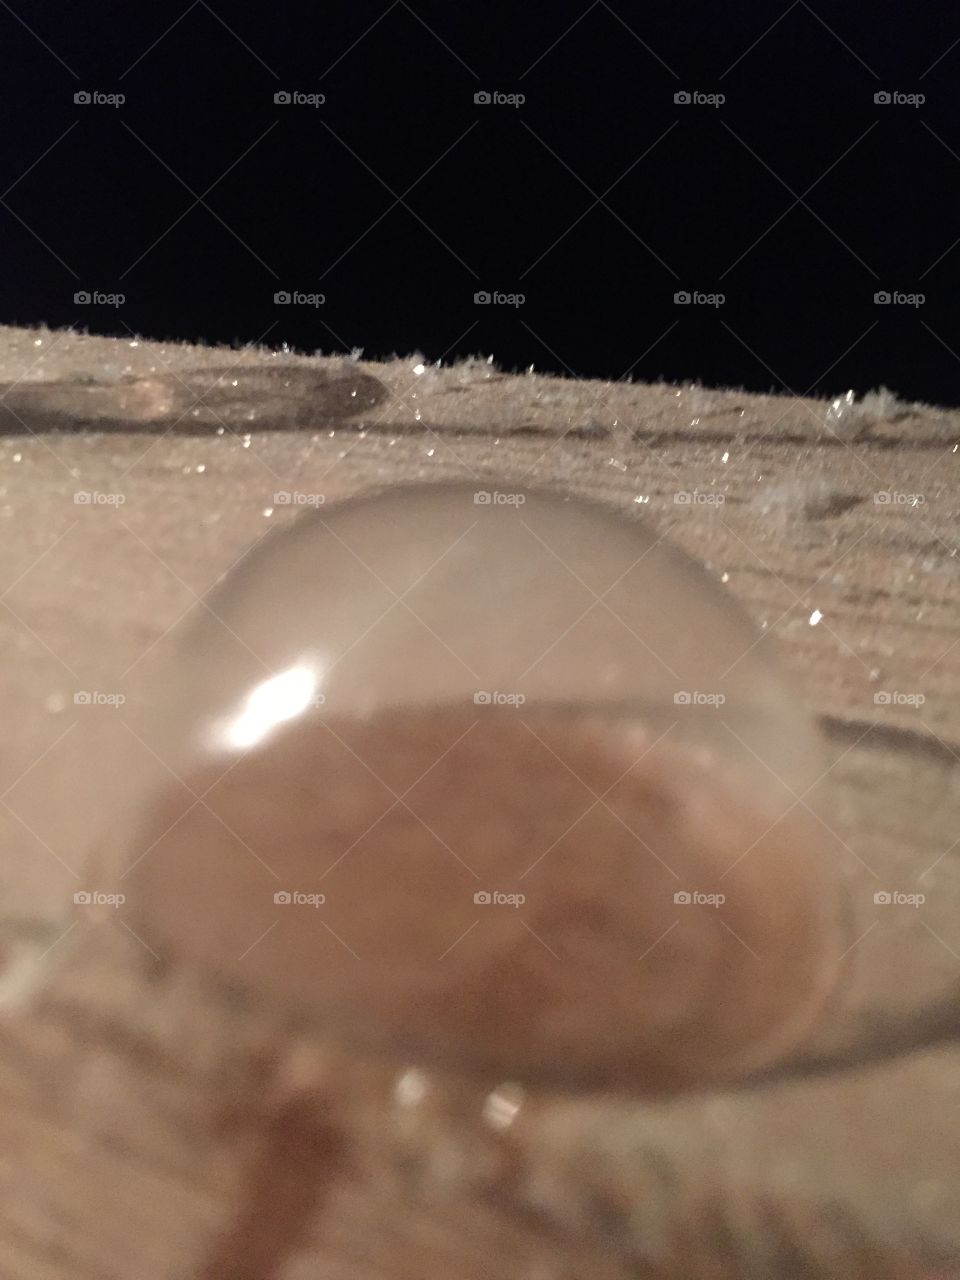 A frozen soap bubble turns into a solid can reflect light and it makes its own shadow